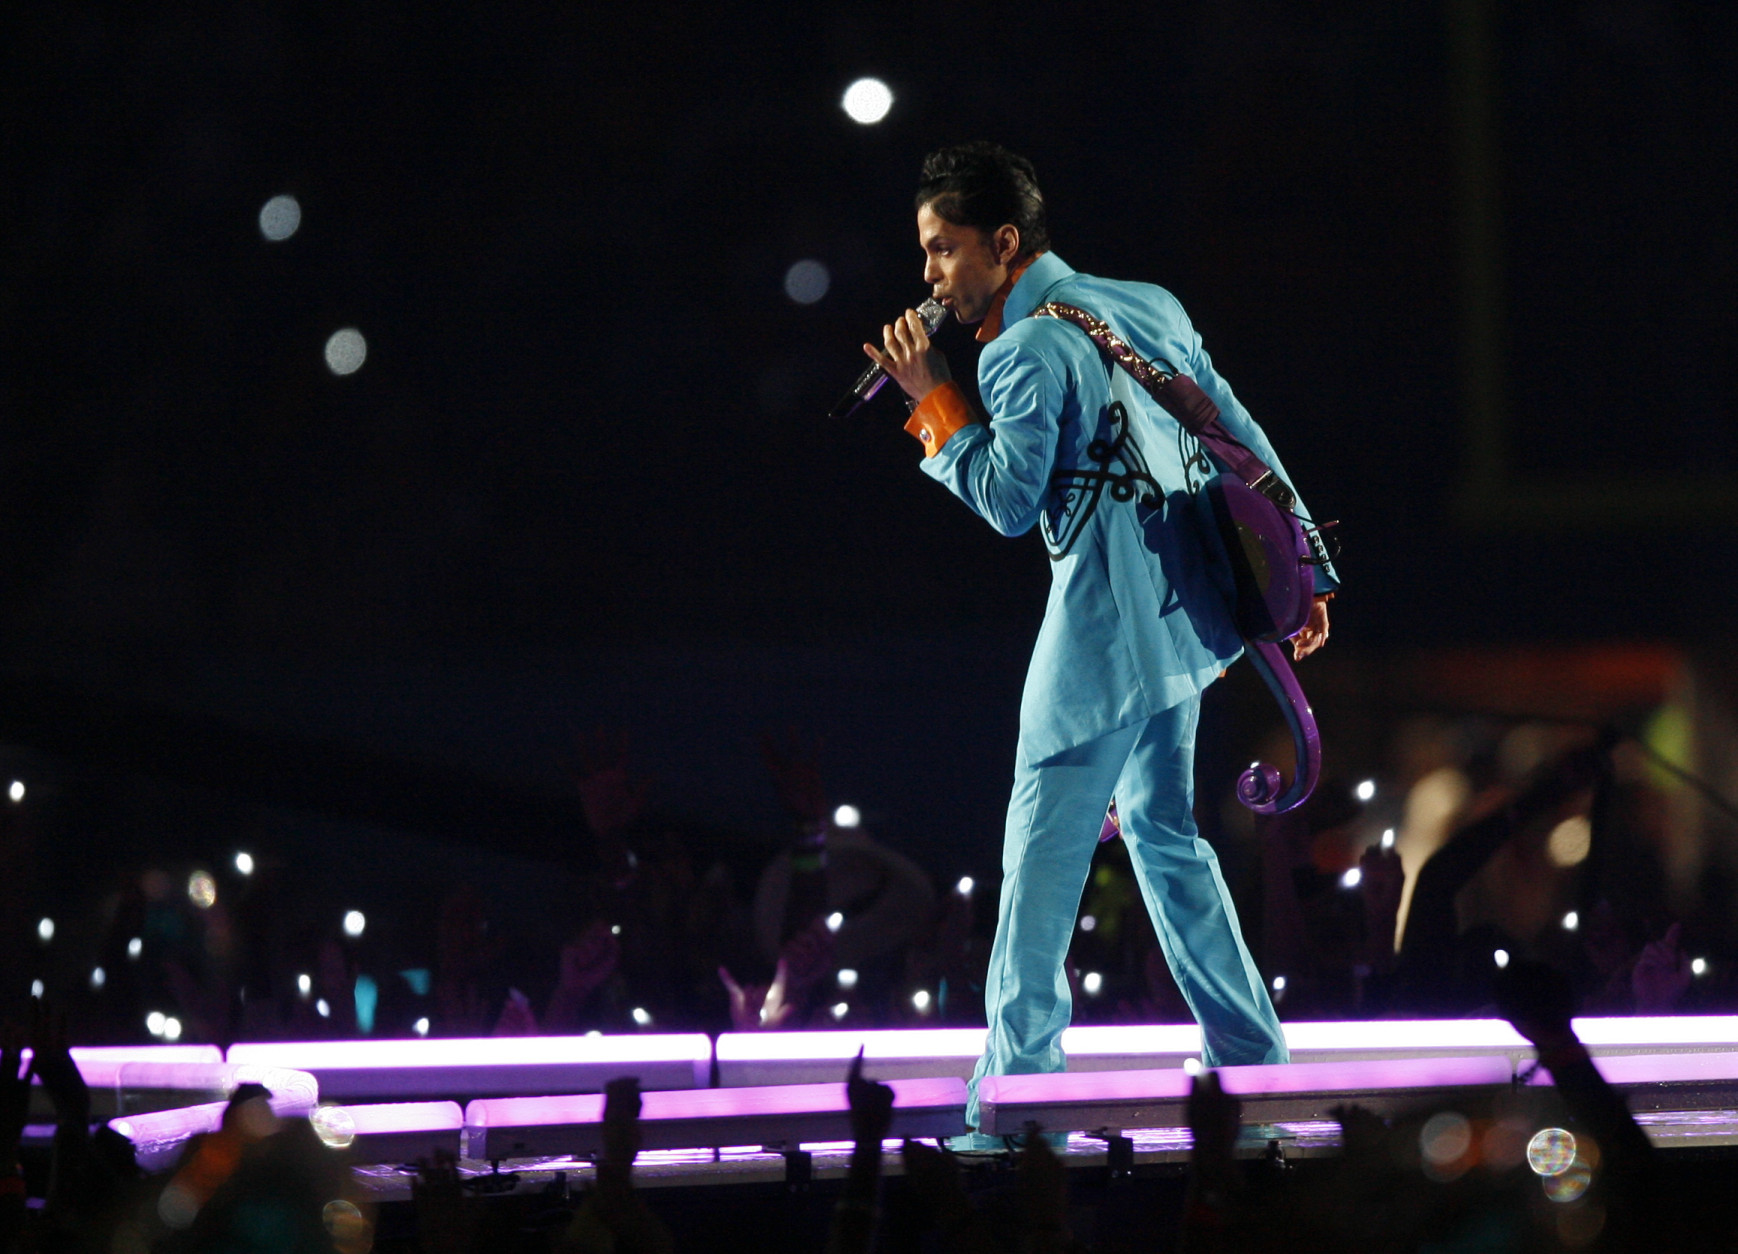 Prince performs during the halftime show at Super Bowl XLI football game at Dolphin Stadium in Miami on Sunday, Feb. 4, 2007. (AP Photo/Kevork Djansezian)